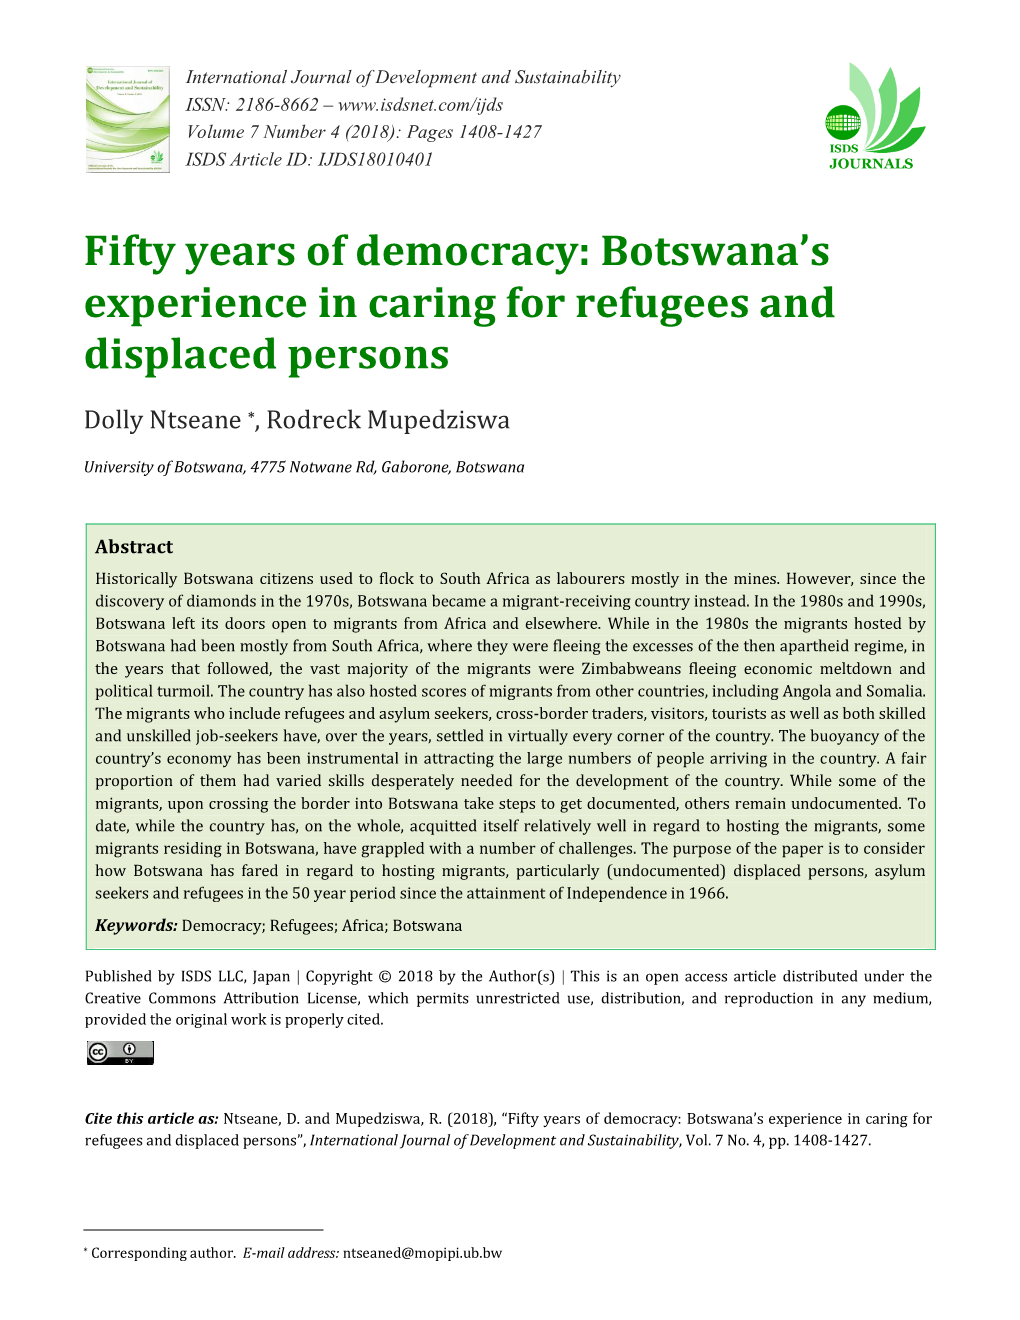 Botswana's Experience in Caring for Refugees and Displaced Persons